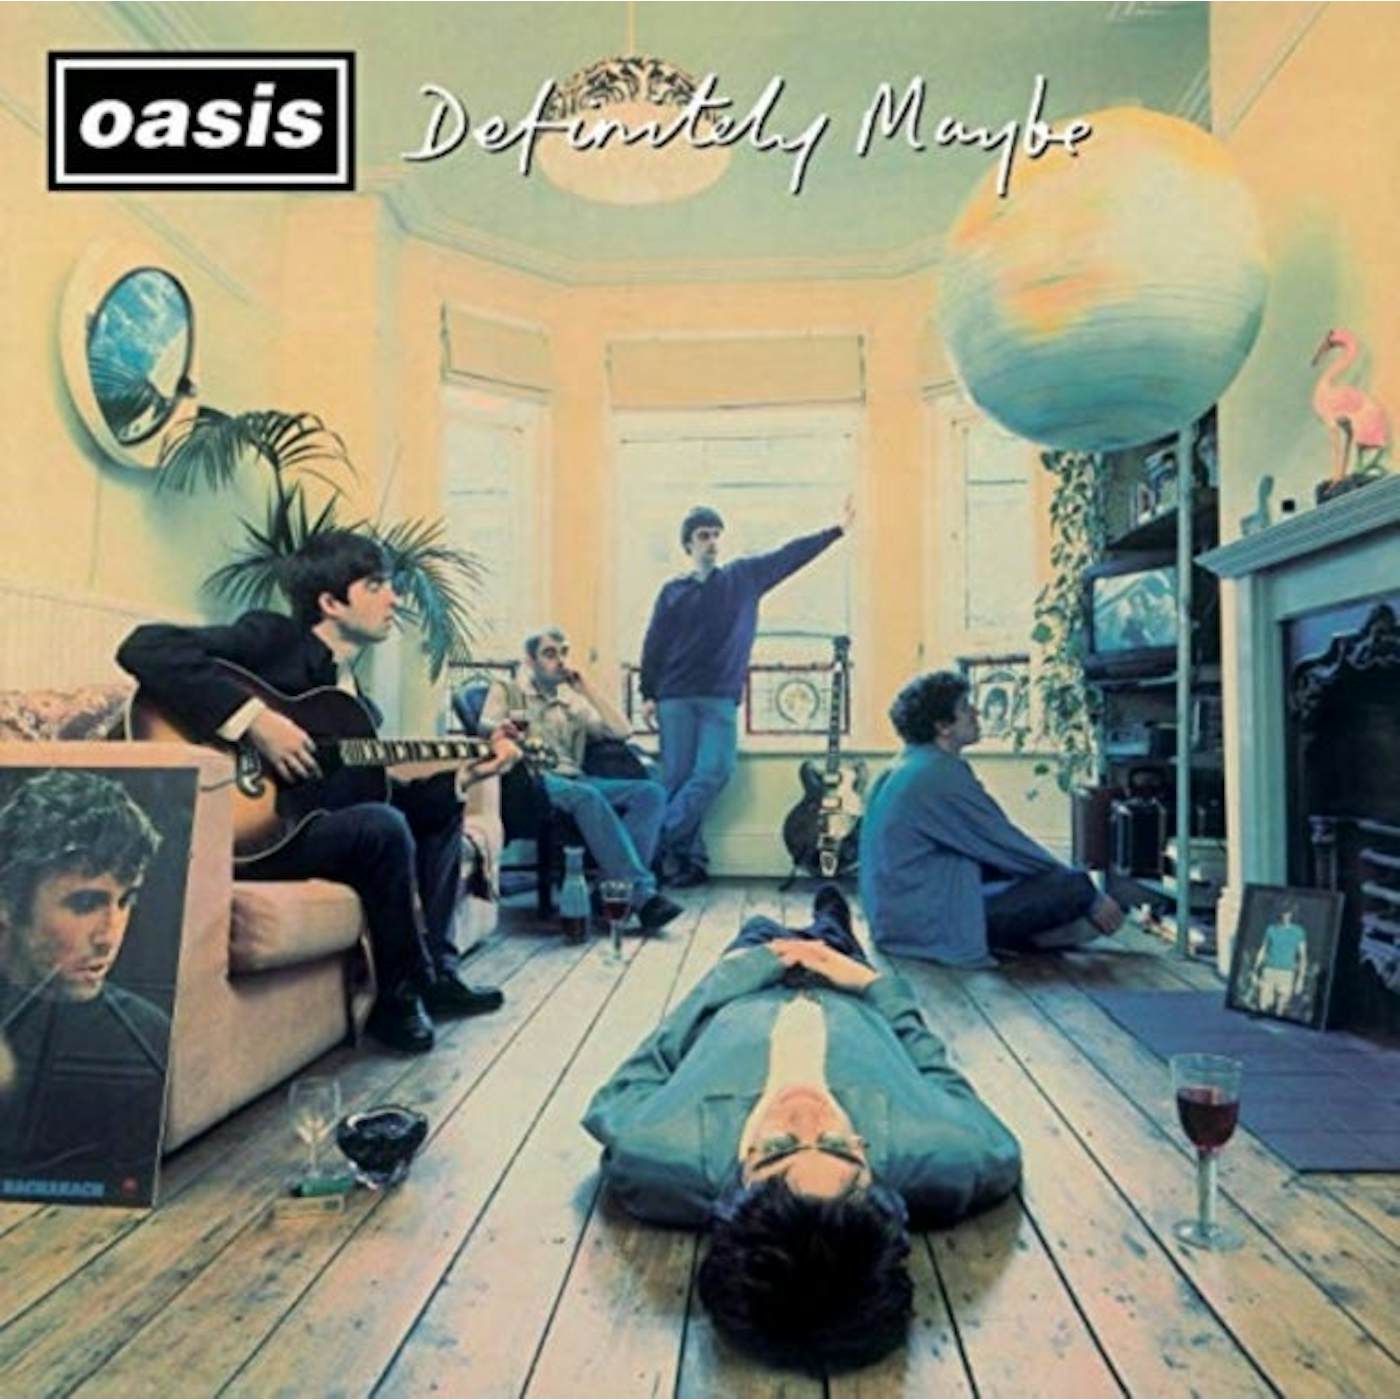 Oasis LP Vinyl Record - Definitely Maybe (Remastered Edition)